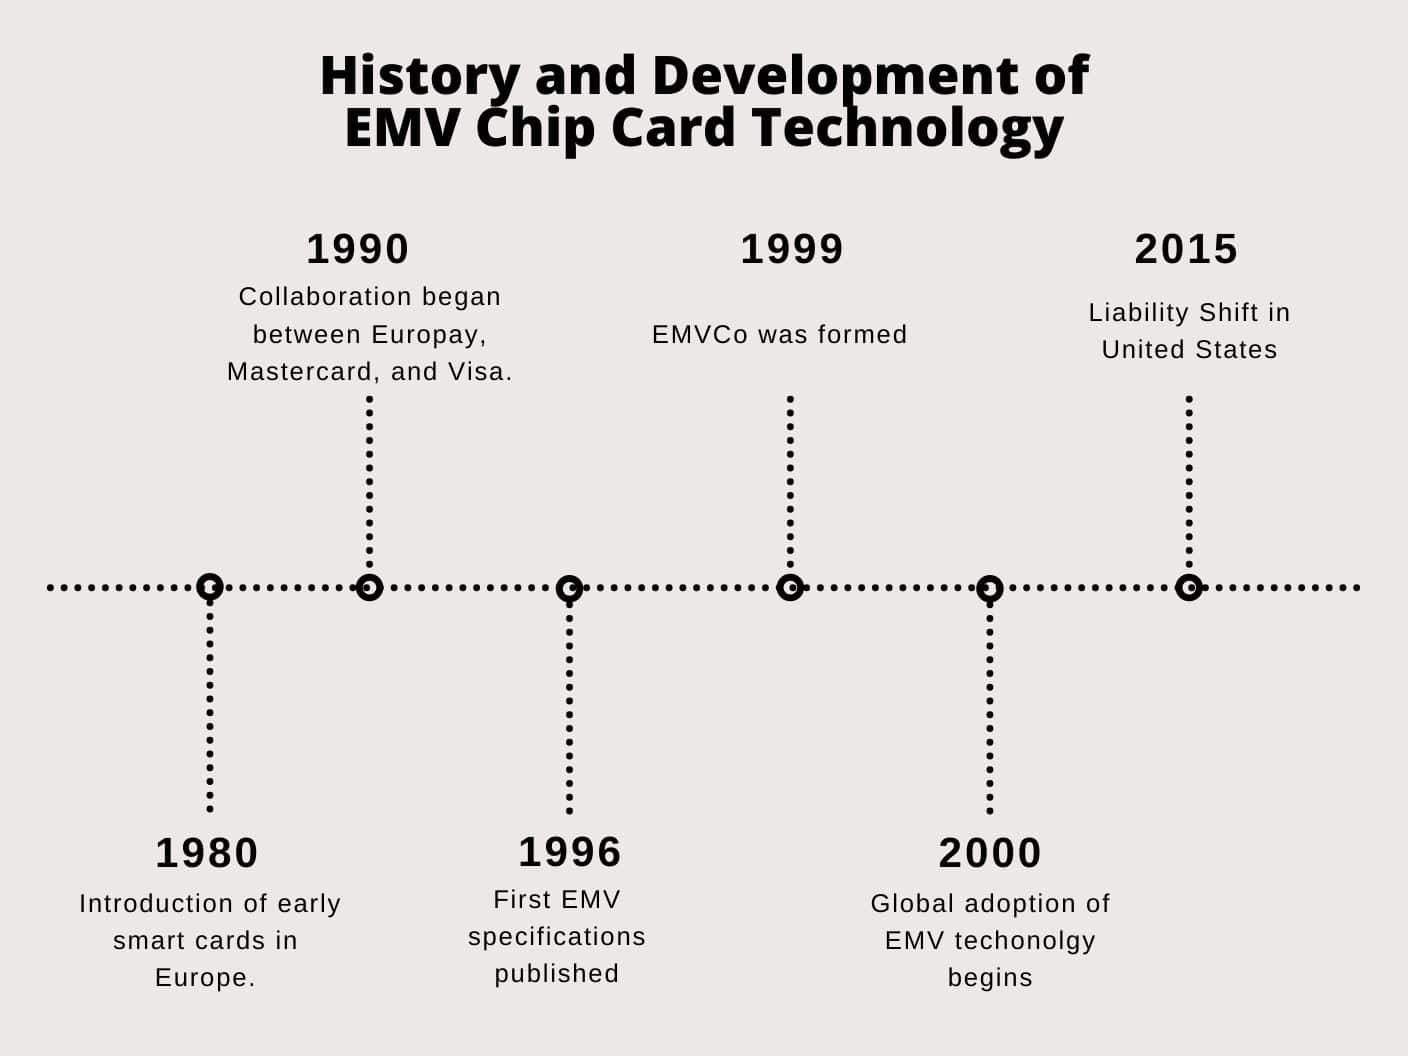 A graphic timeline of history and development of EMV chip card technology